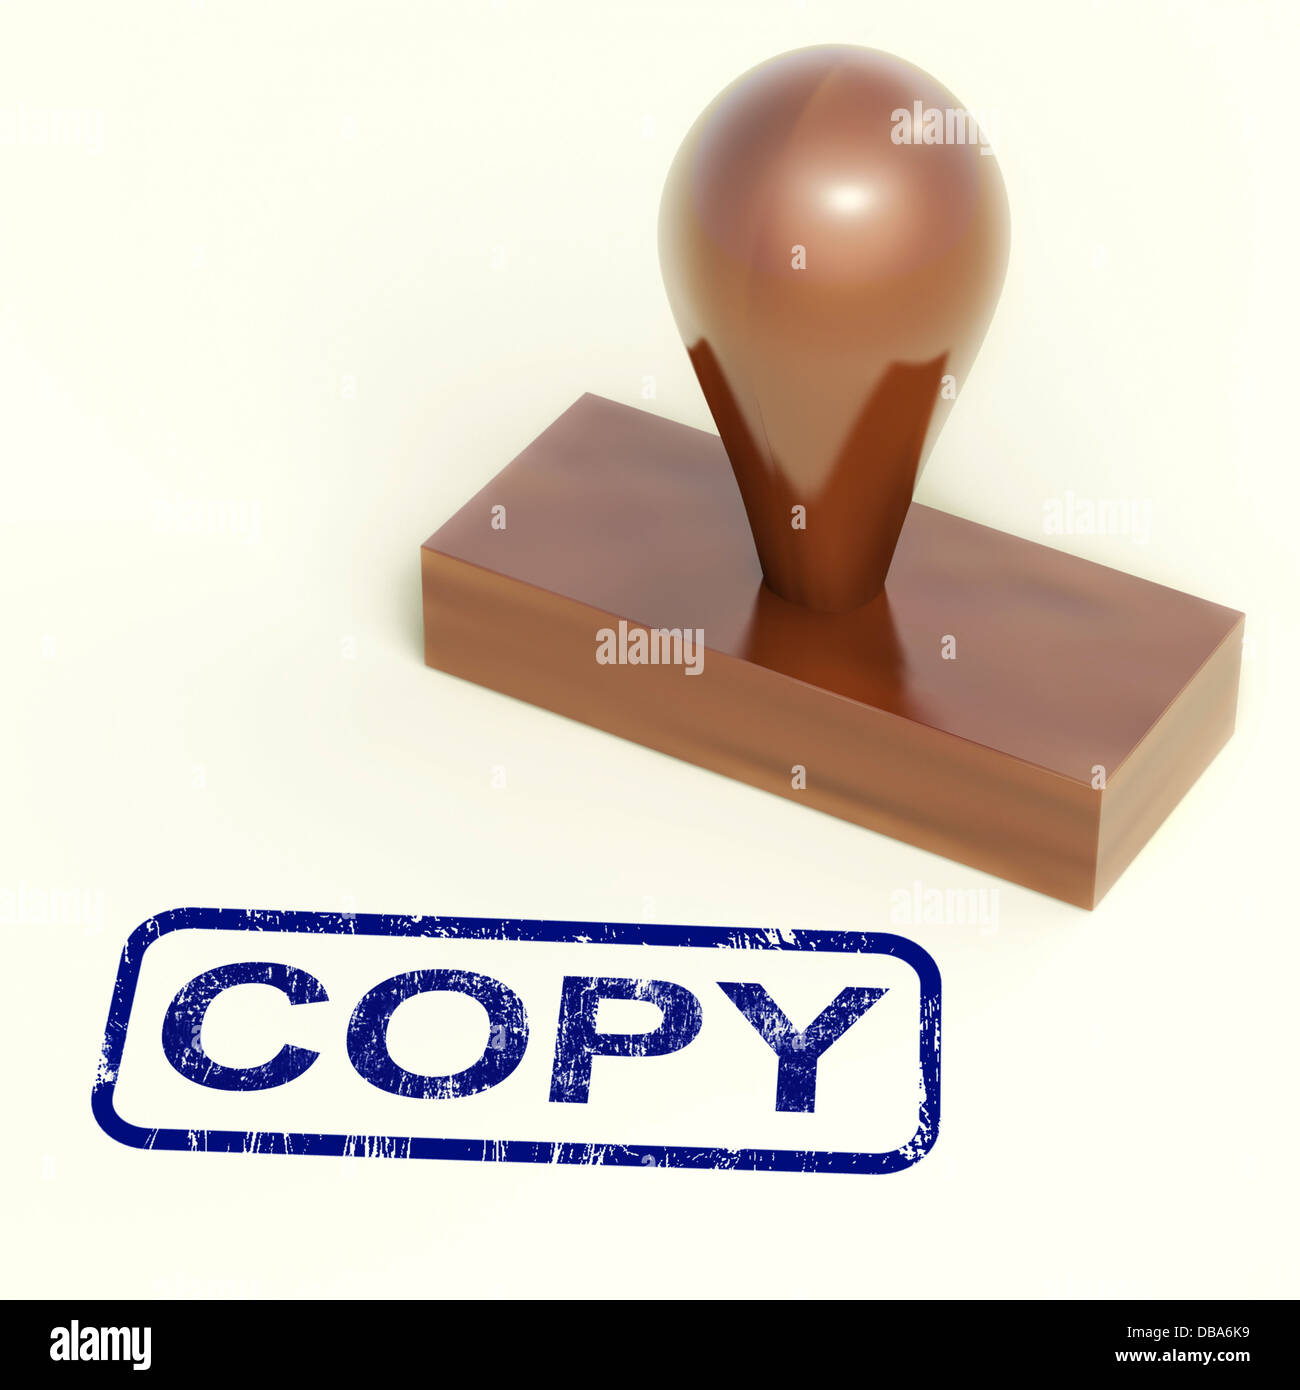 Copy Rubber Stamp Shows Duplicate Replicate Or Reproduce Stock Photo